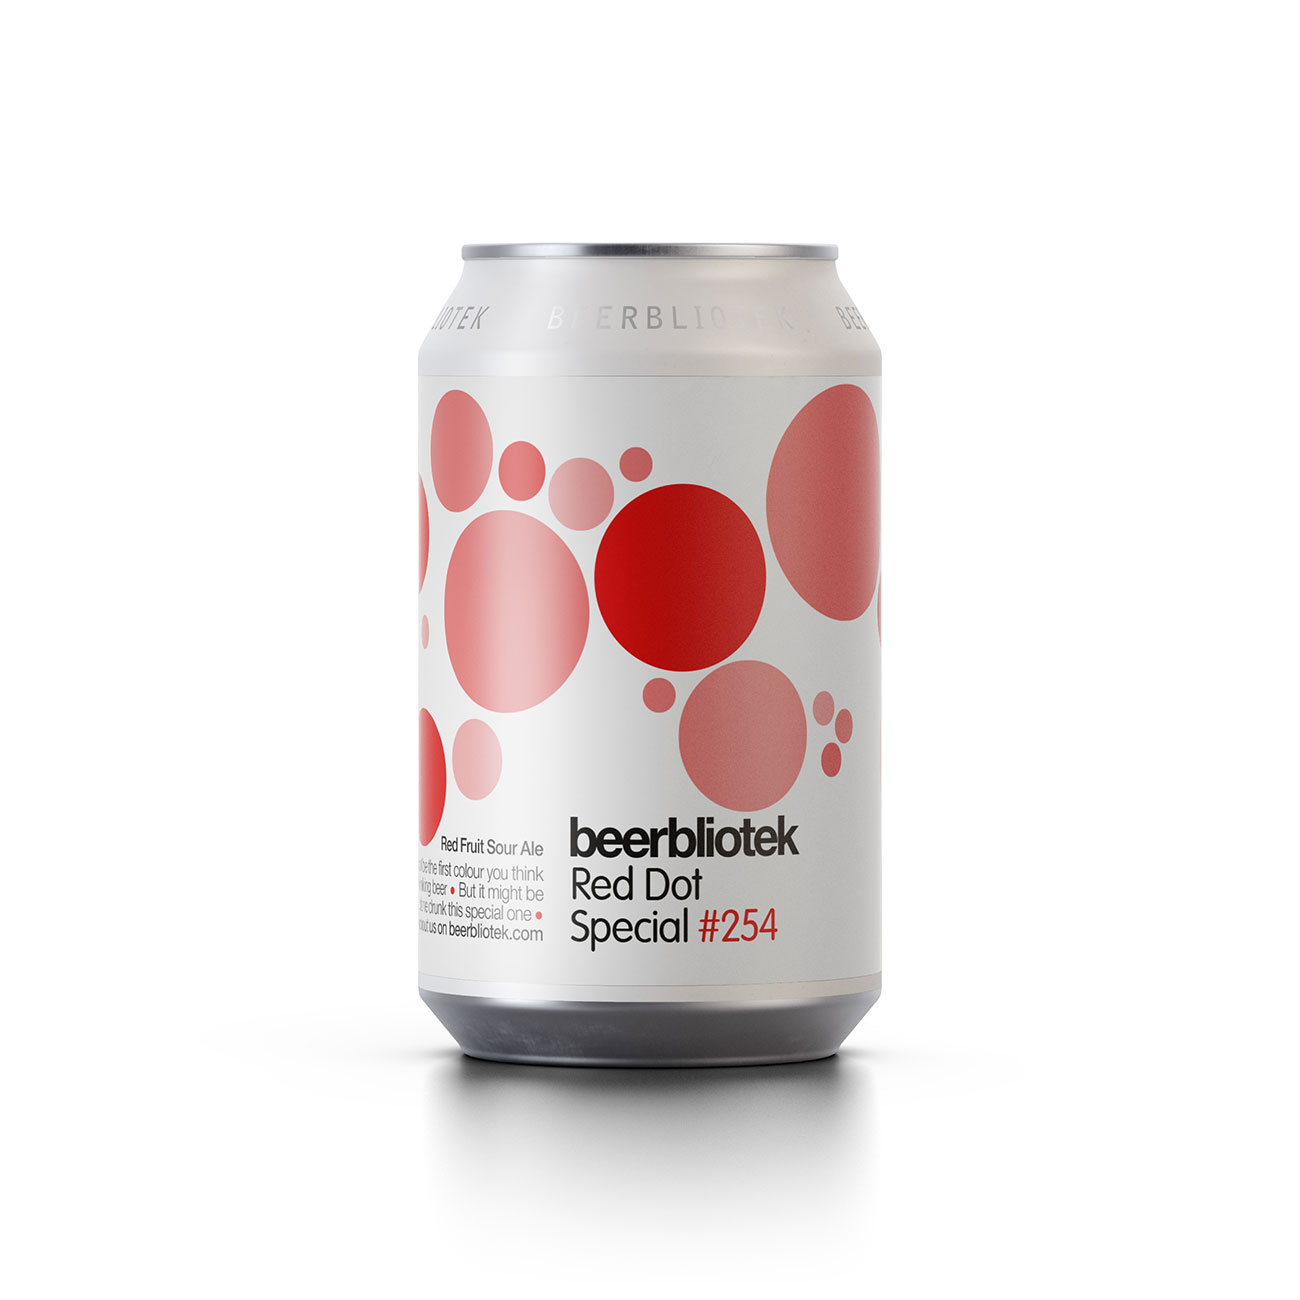 A can packshot of Red Dot Special a Red Fruit Sour Ale, brewed by Swedish Craft Brewery Beerbliotek.